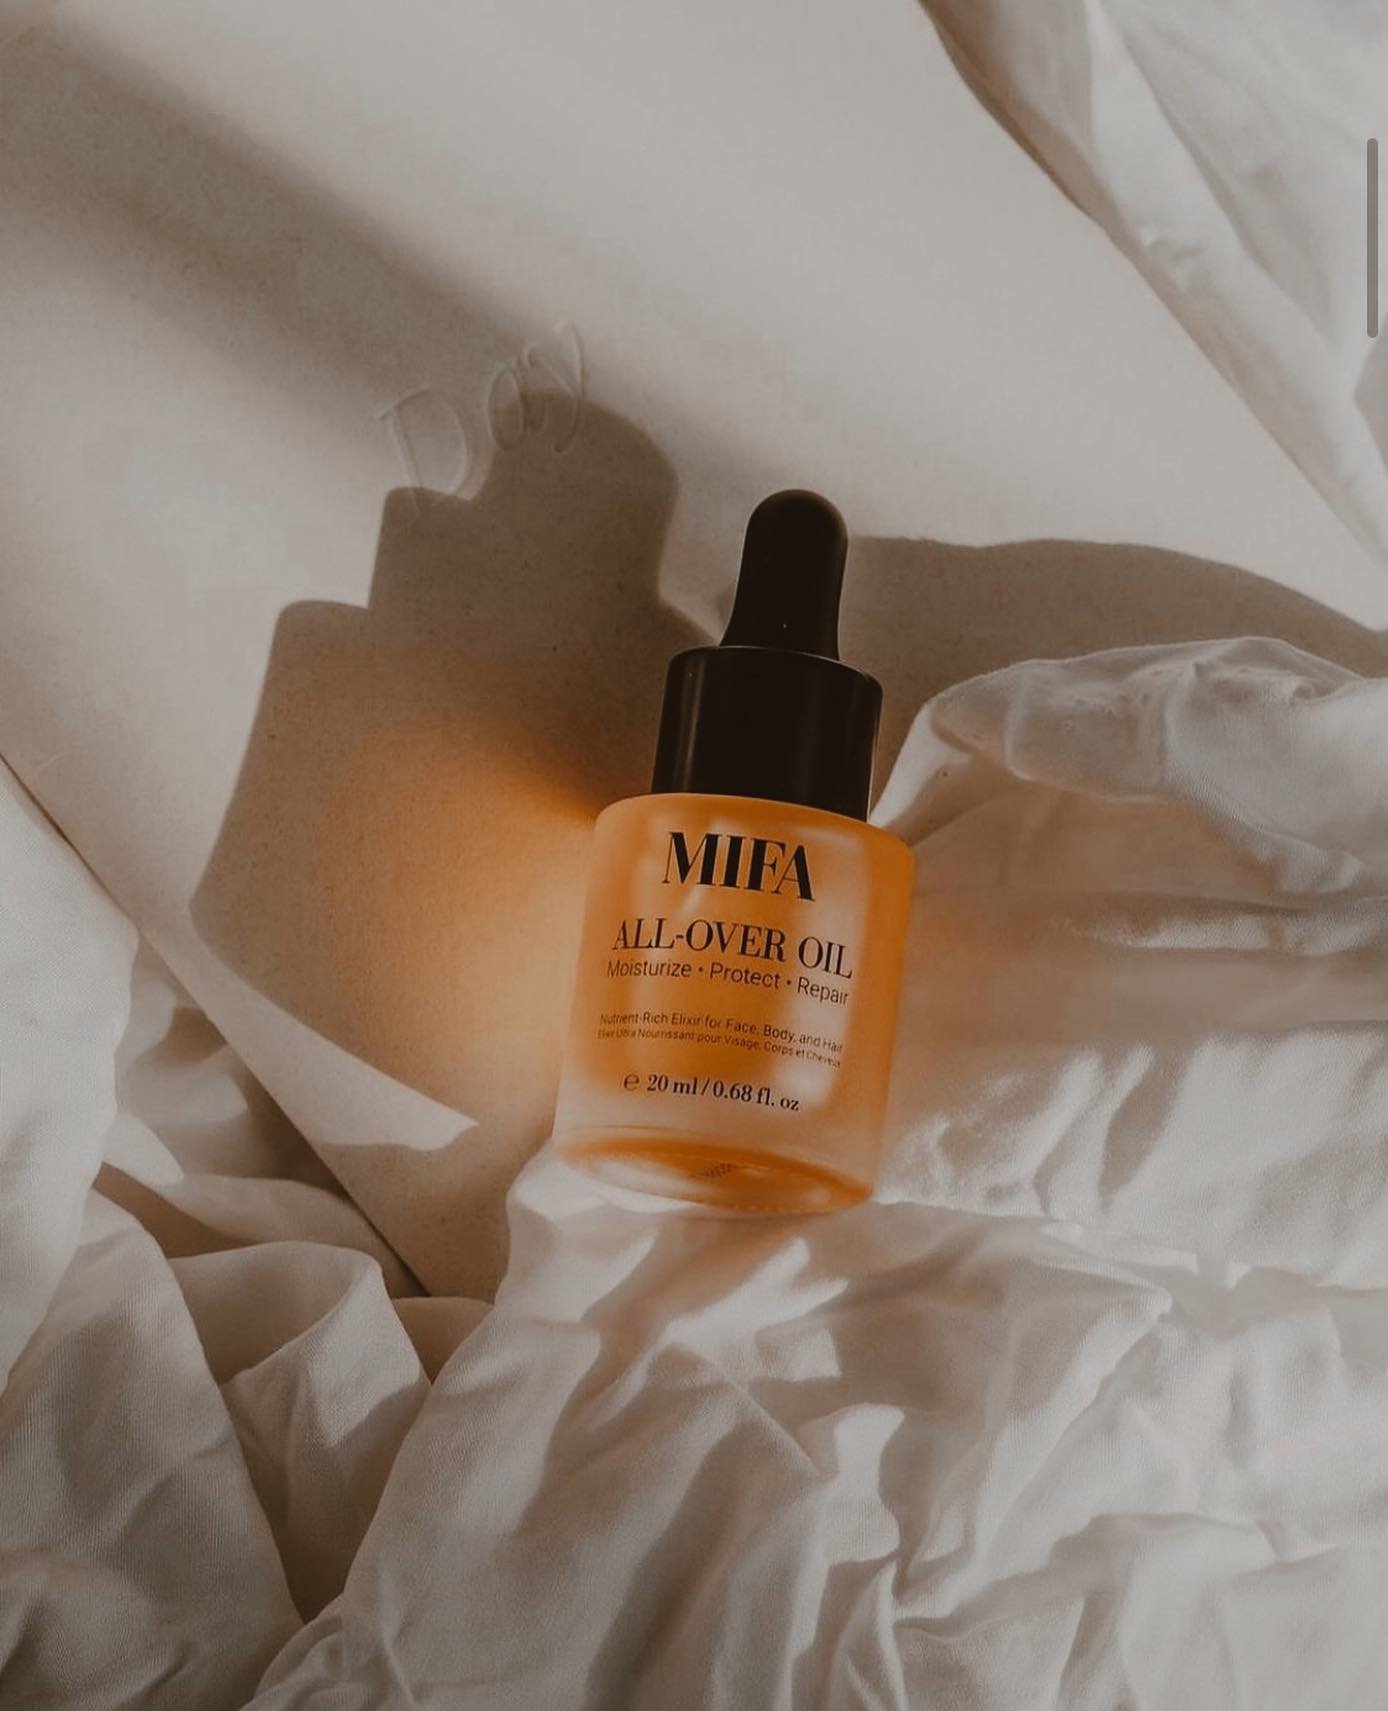 This one oil has replaced all of my other face, hair and body oils! I have very sensitive skin and it works beautifully&rdquo; &ndash; Emily, Mifa Customer

Seriously though, this is our holy grail oil for all over. We can&rsquo;t get enough 🤍

@mif